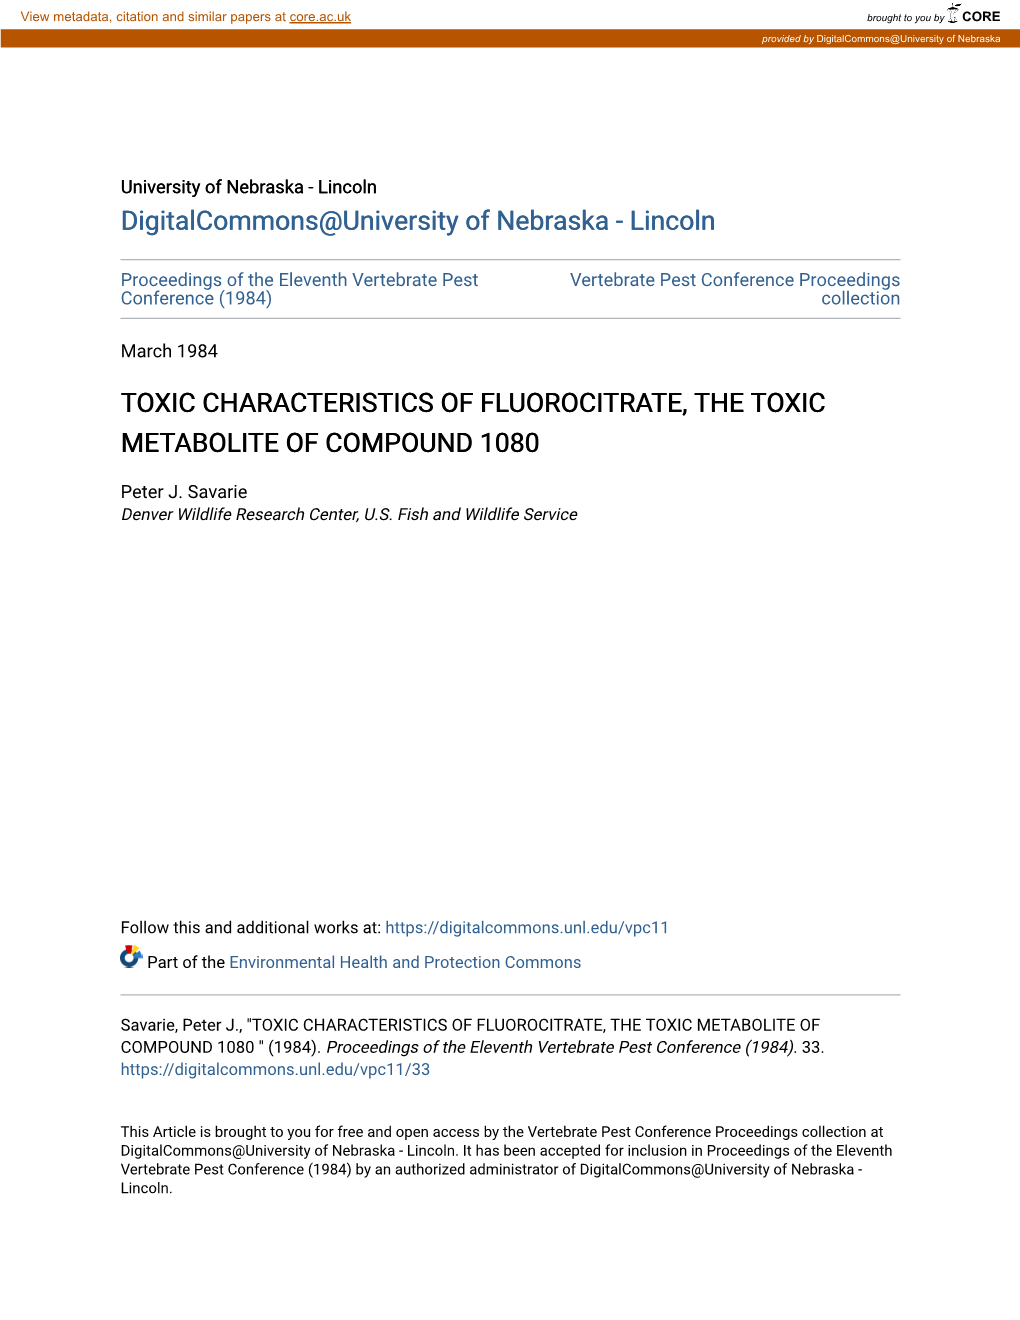 Toxic Characteristics of Fluorocitrate, the Toxic Metabolite of Compound 1080